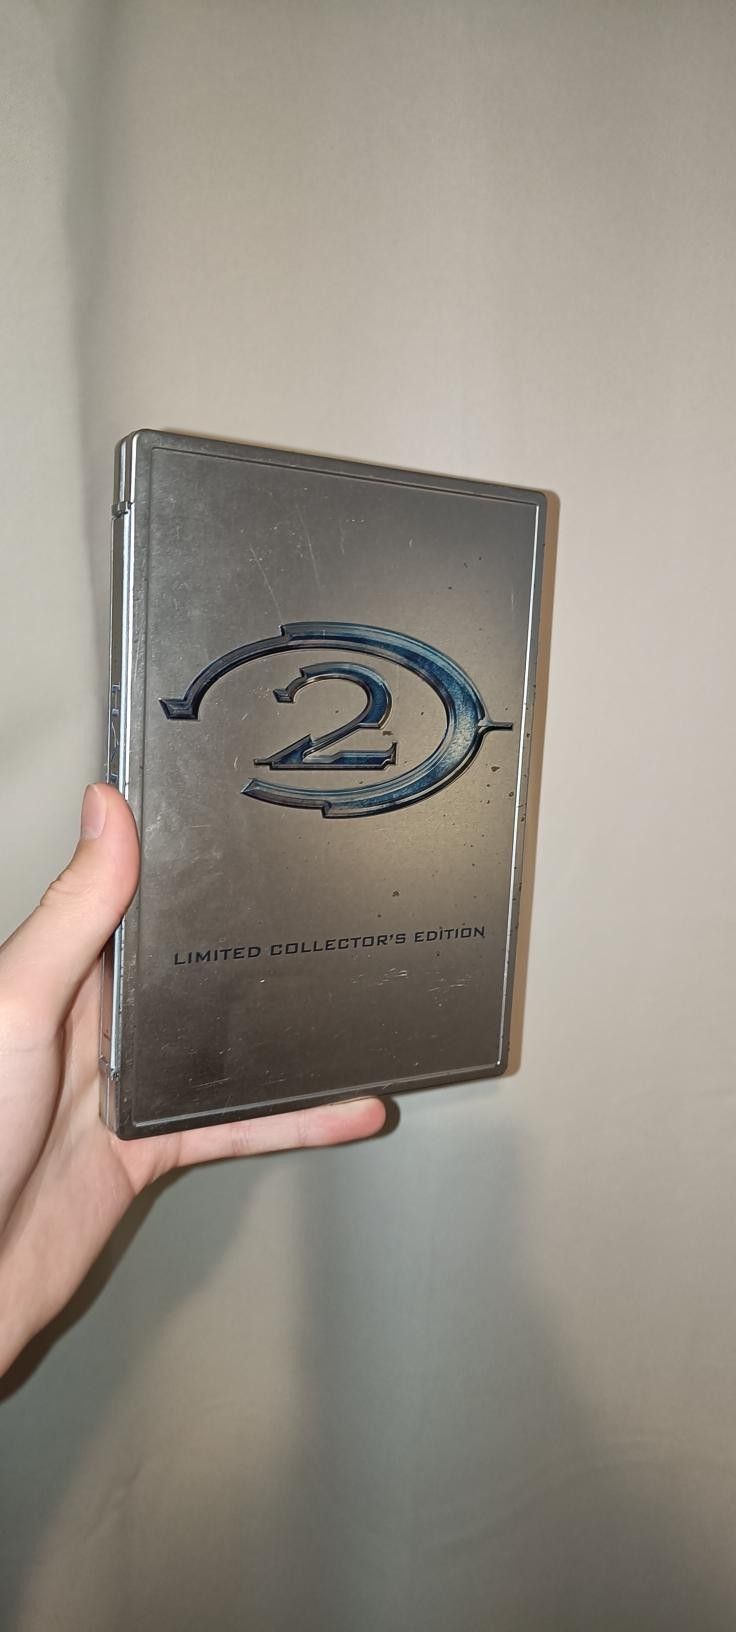 Halo 2 Limited Edition Collector's Edition